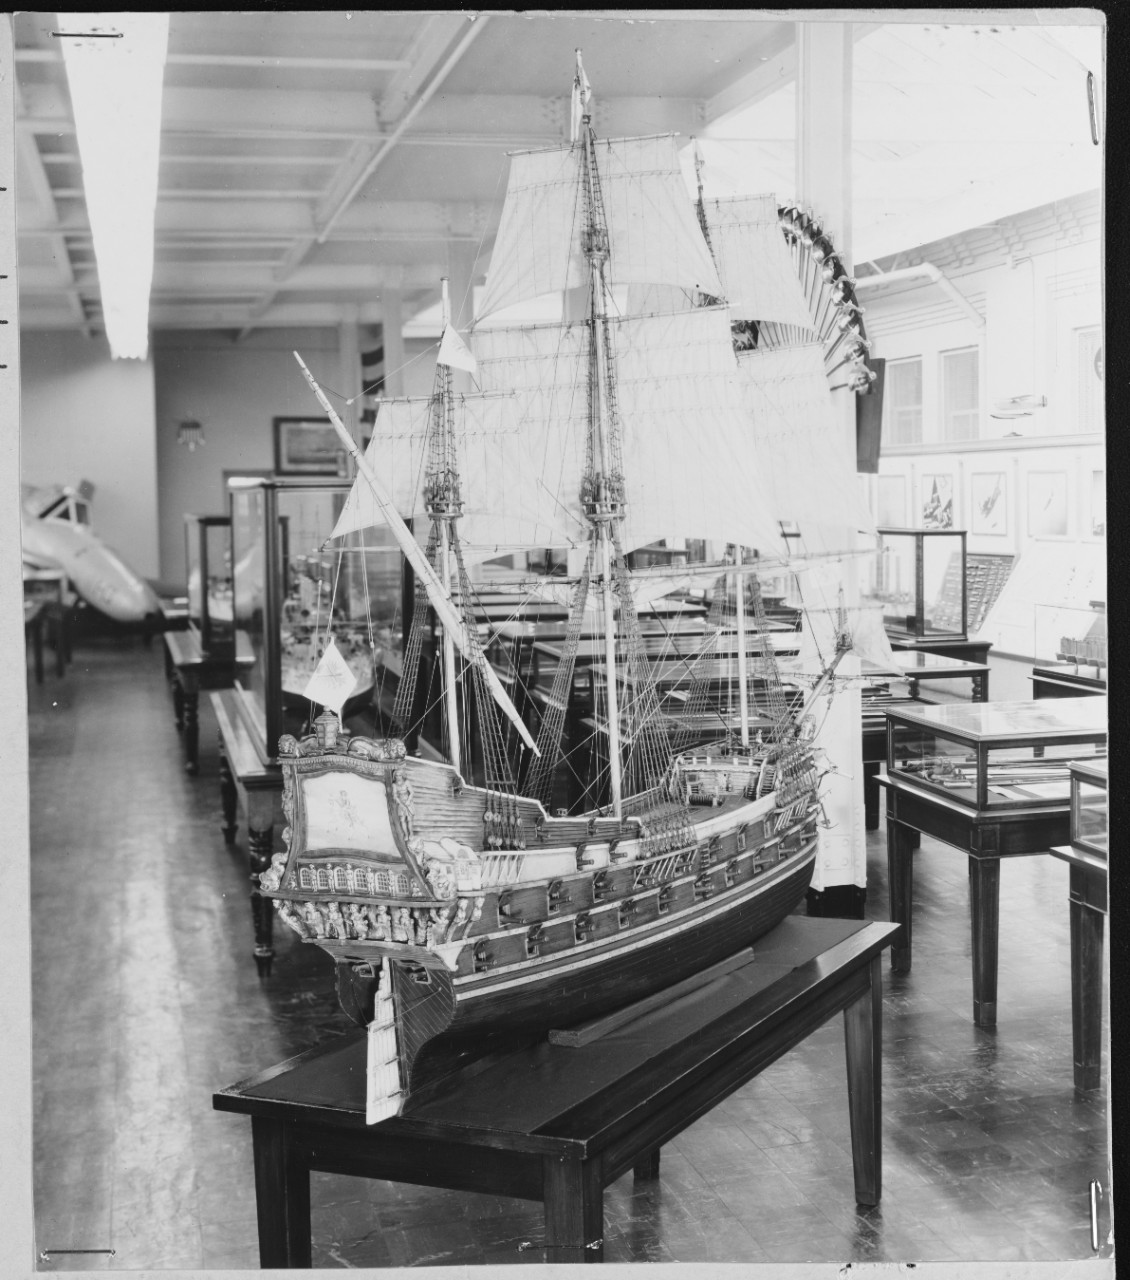 Warship of about 54 guns, circa early 18th century